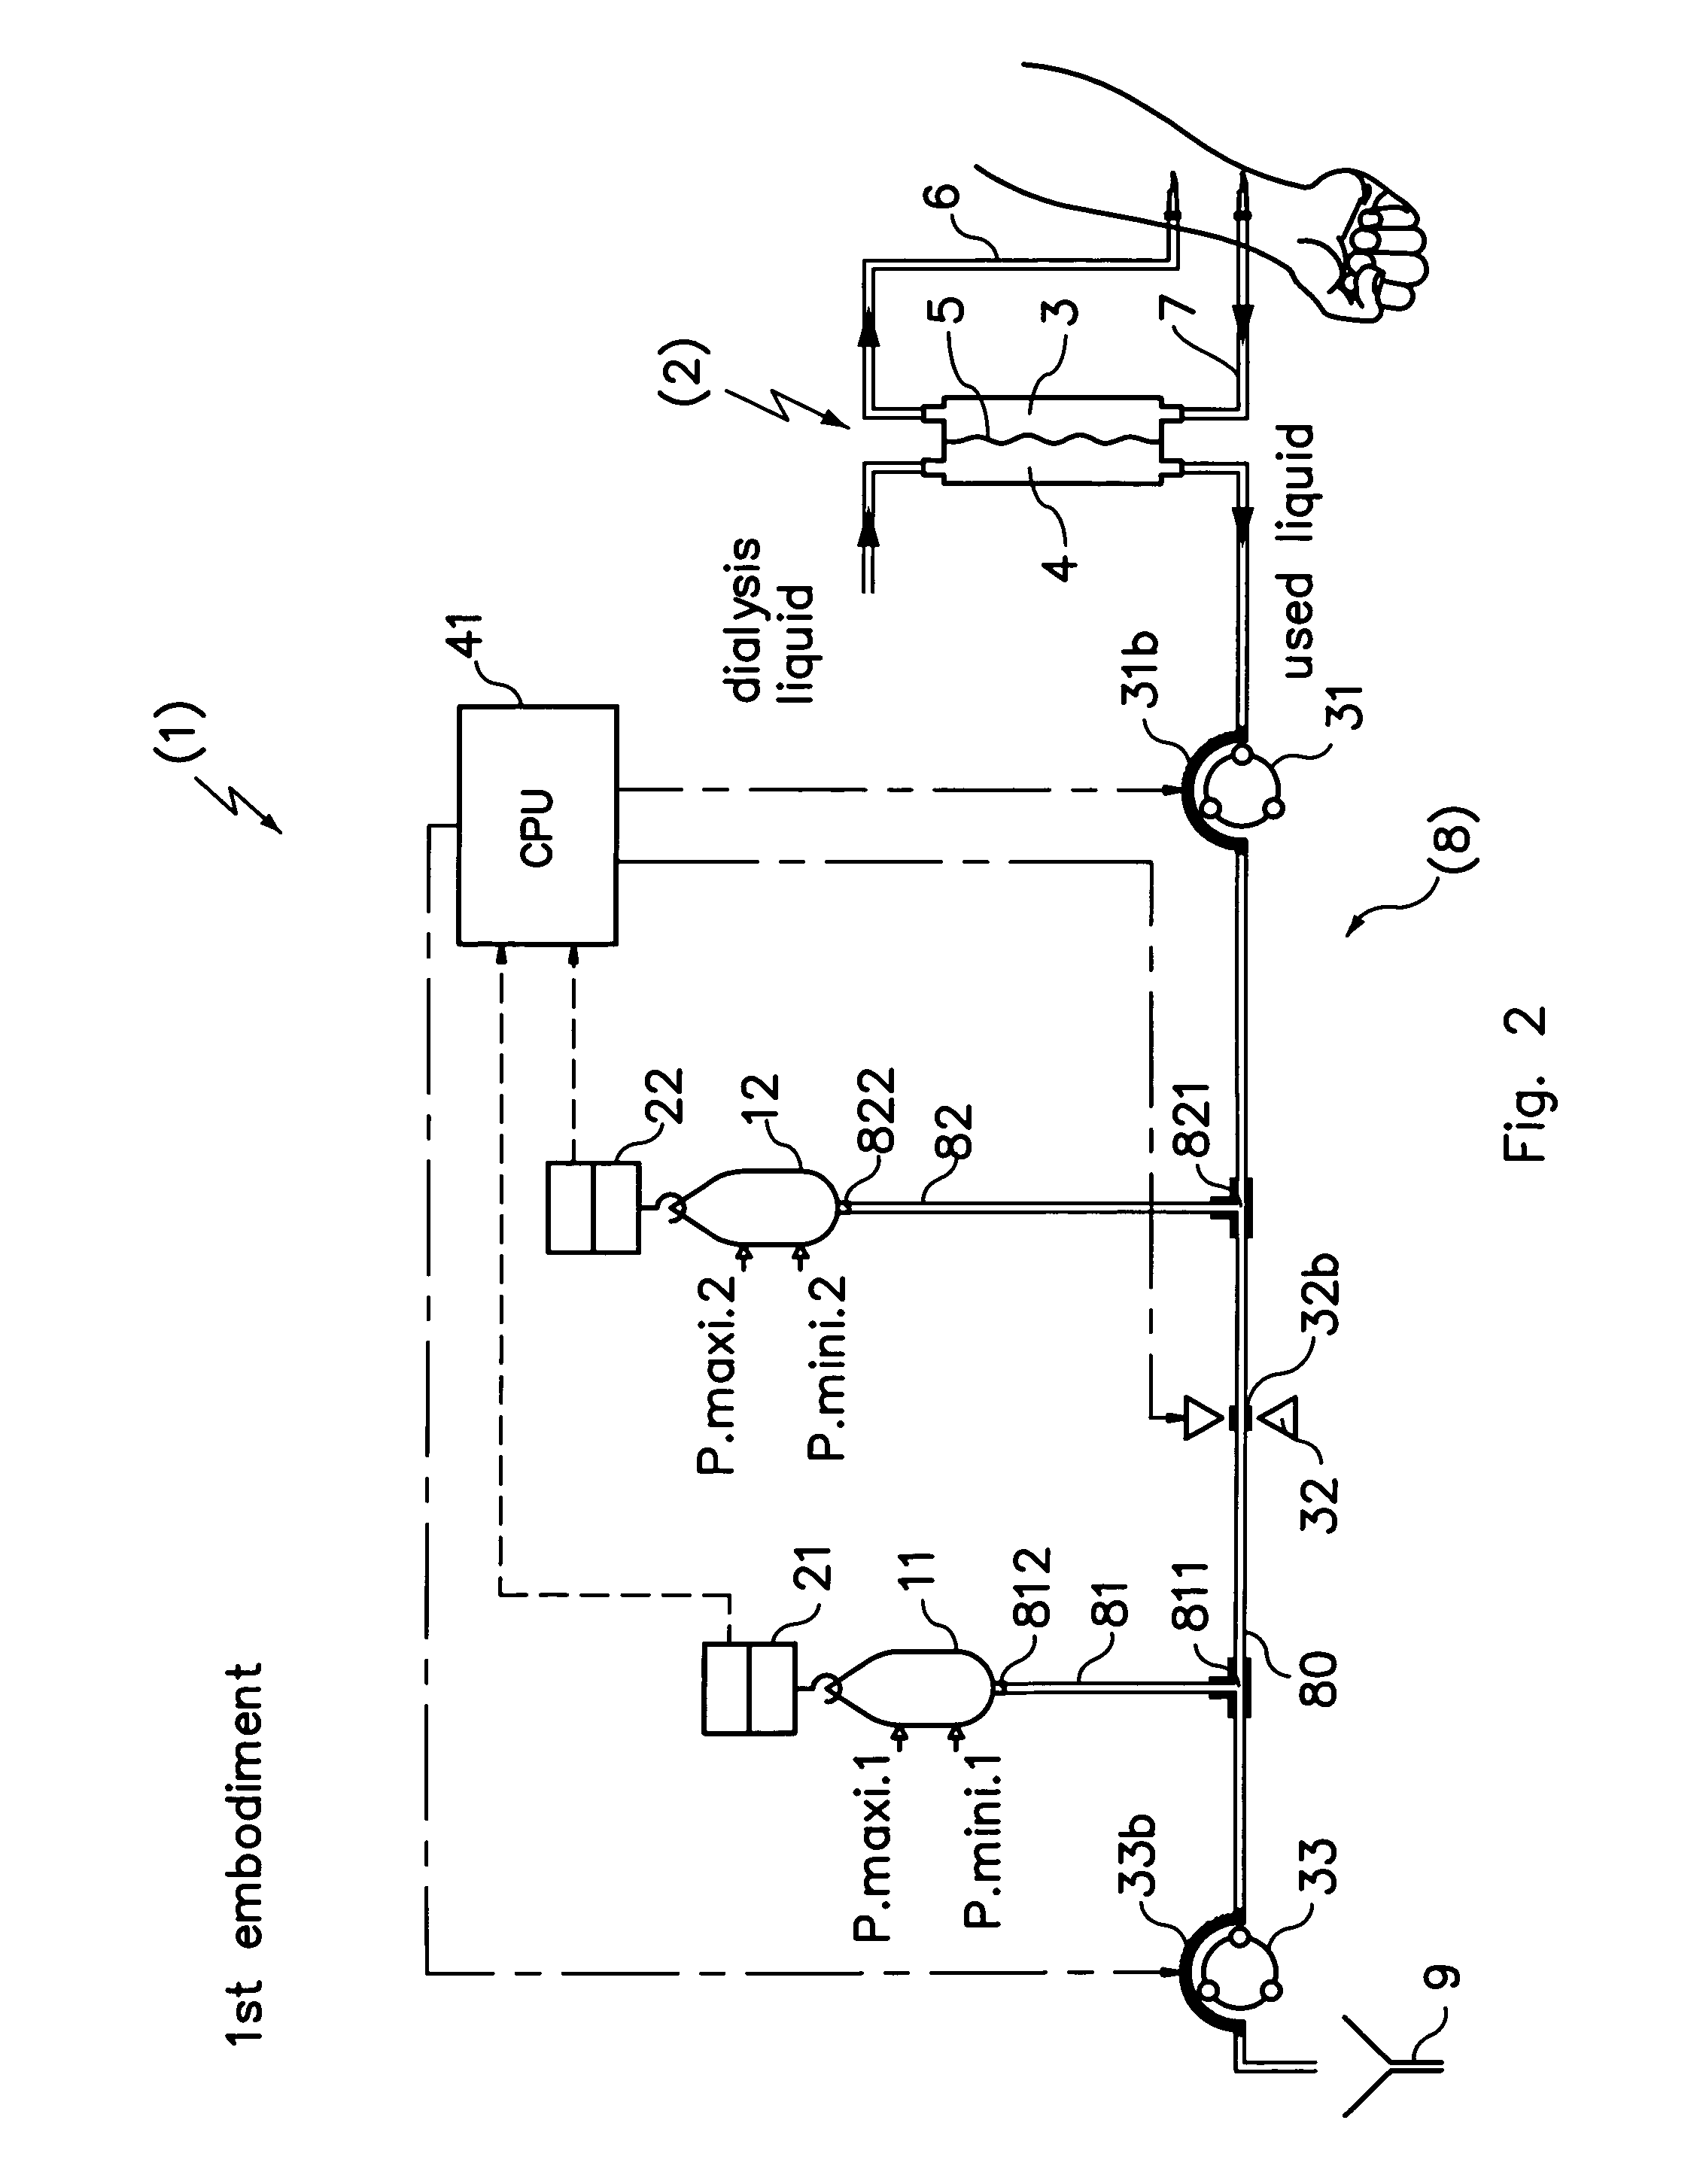 Extracorporeal treatment device with automatic emptying of waste bag